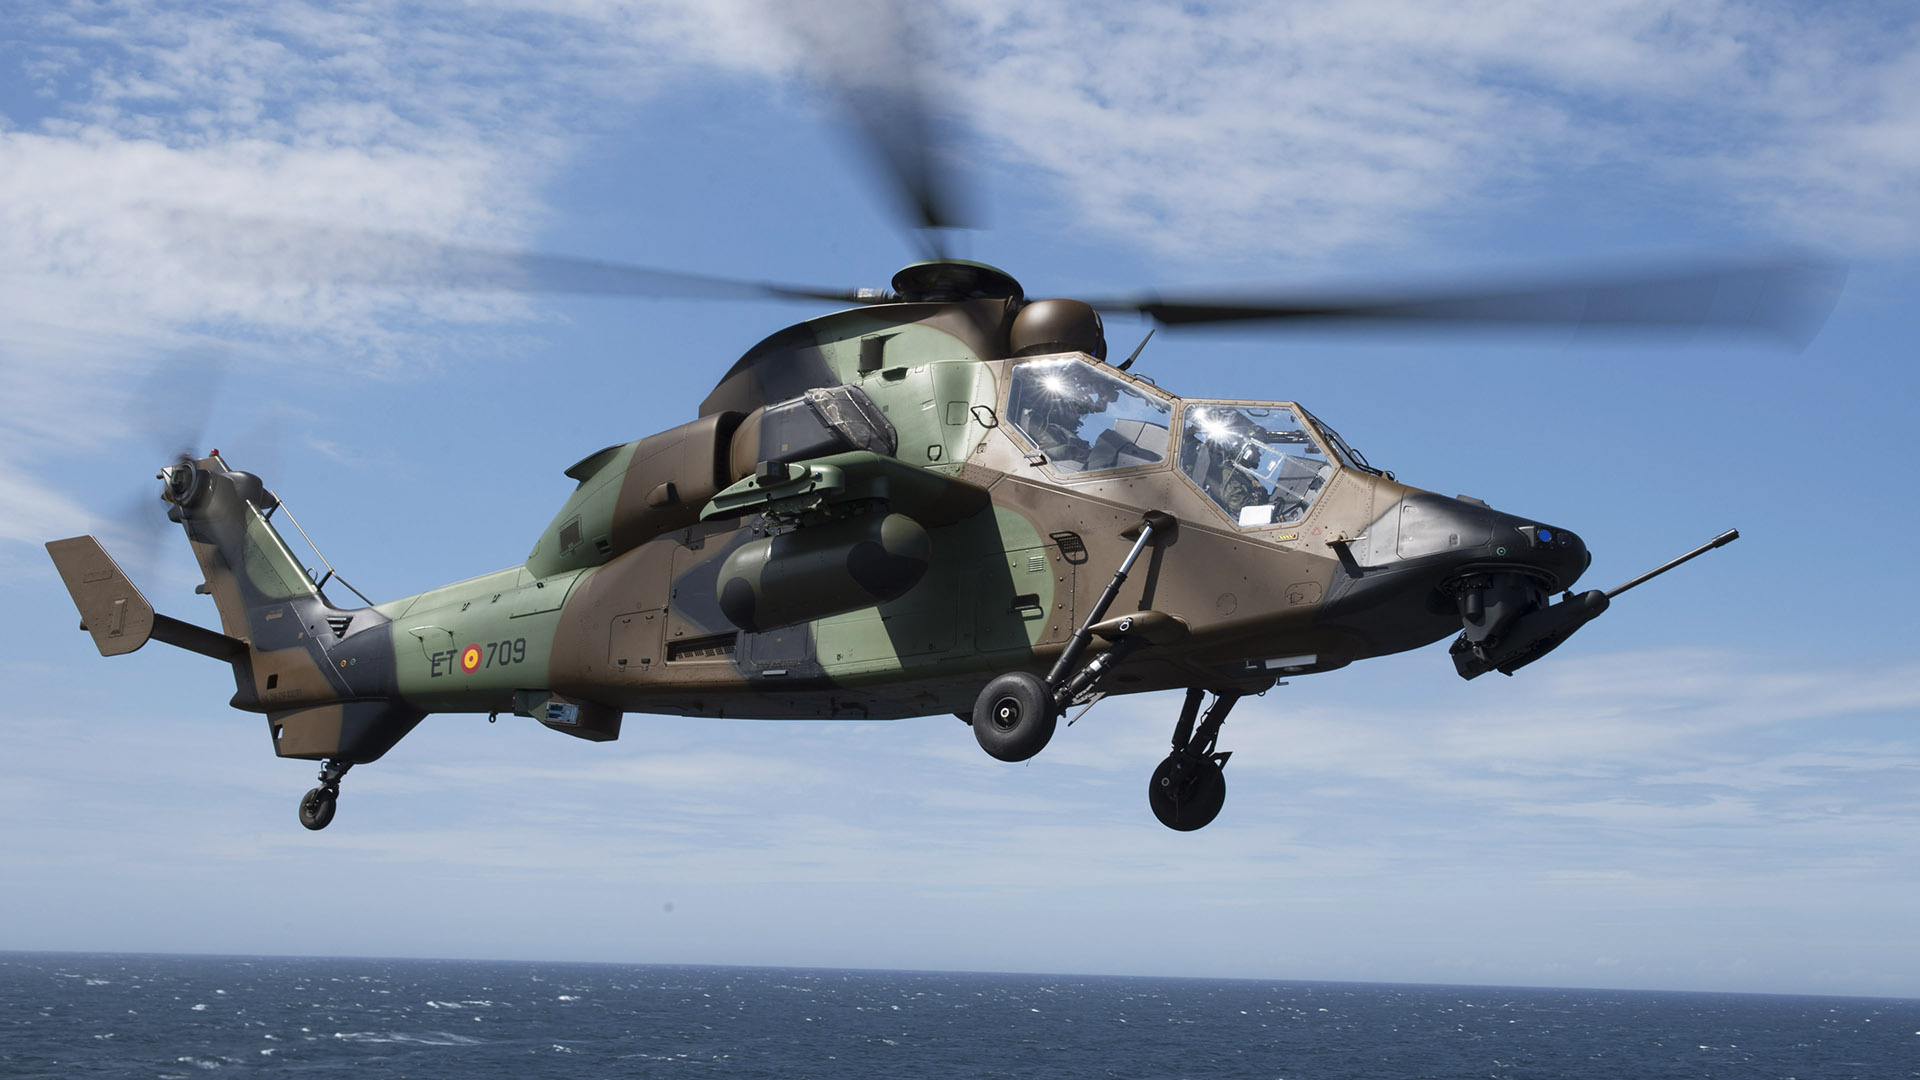 Indra To Equip Latest Mission Defence Systems Onto Spanish Army's Tiger MKIII Helicopters - MilitaryLeak 1920x1080